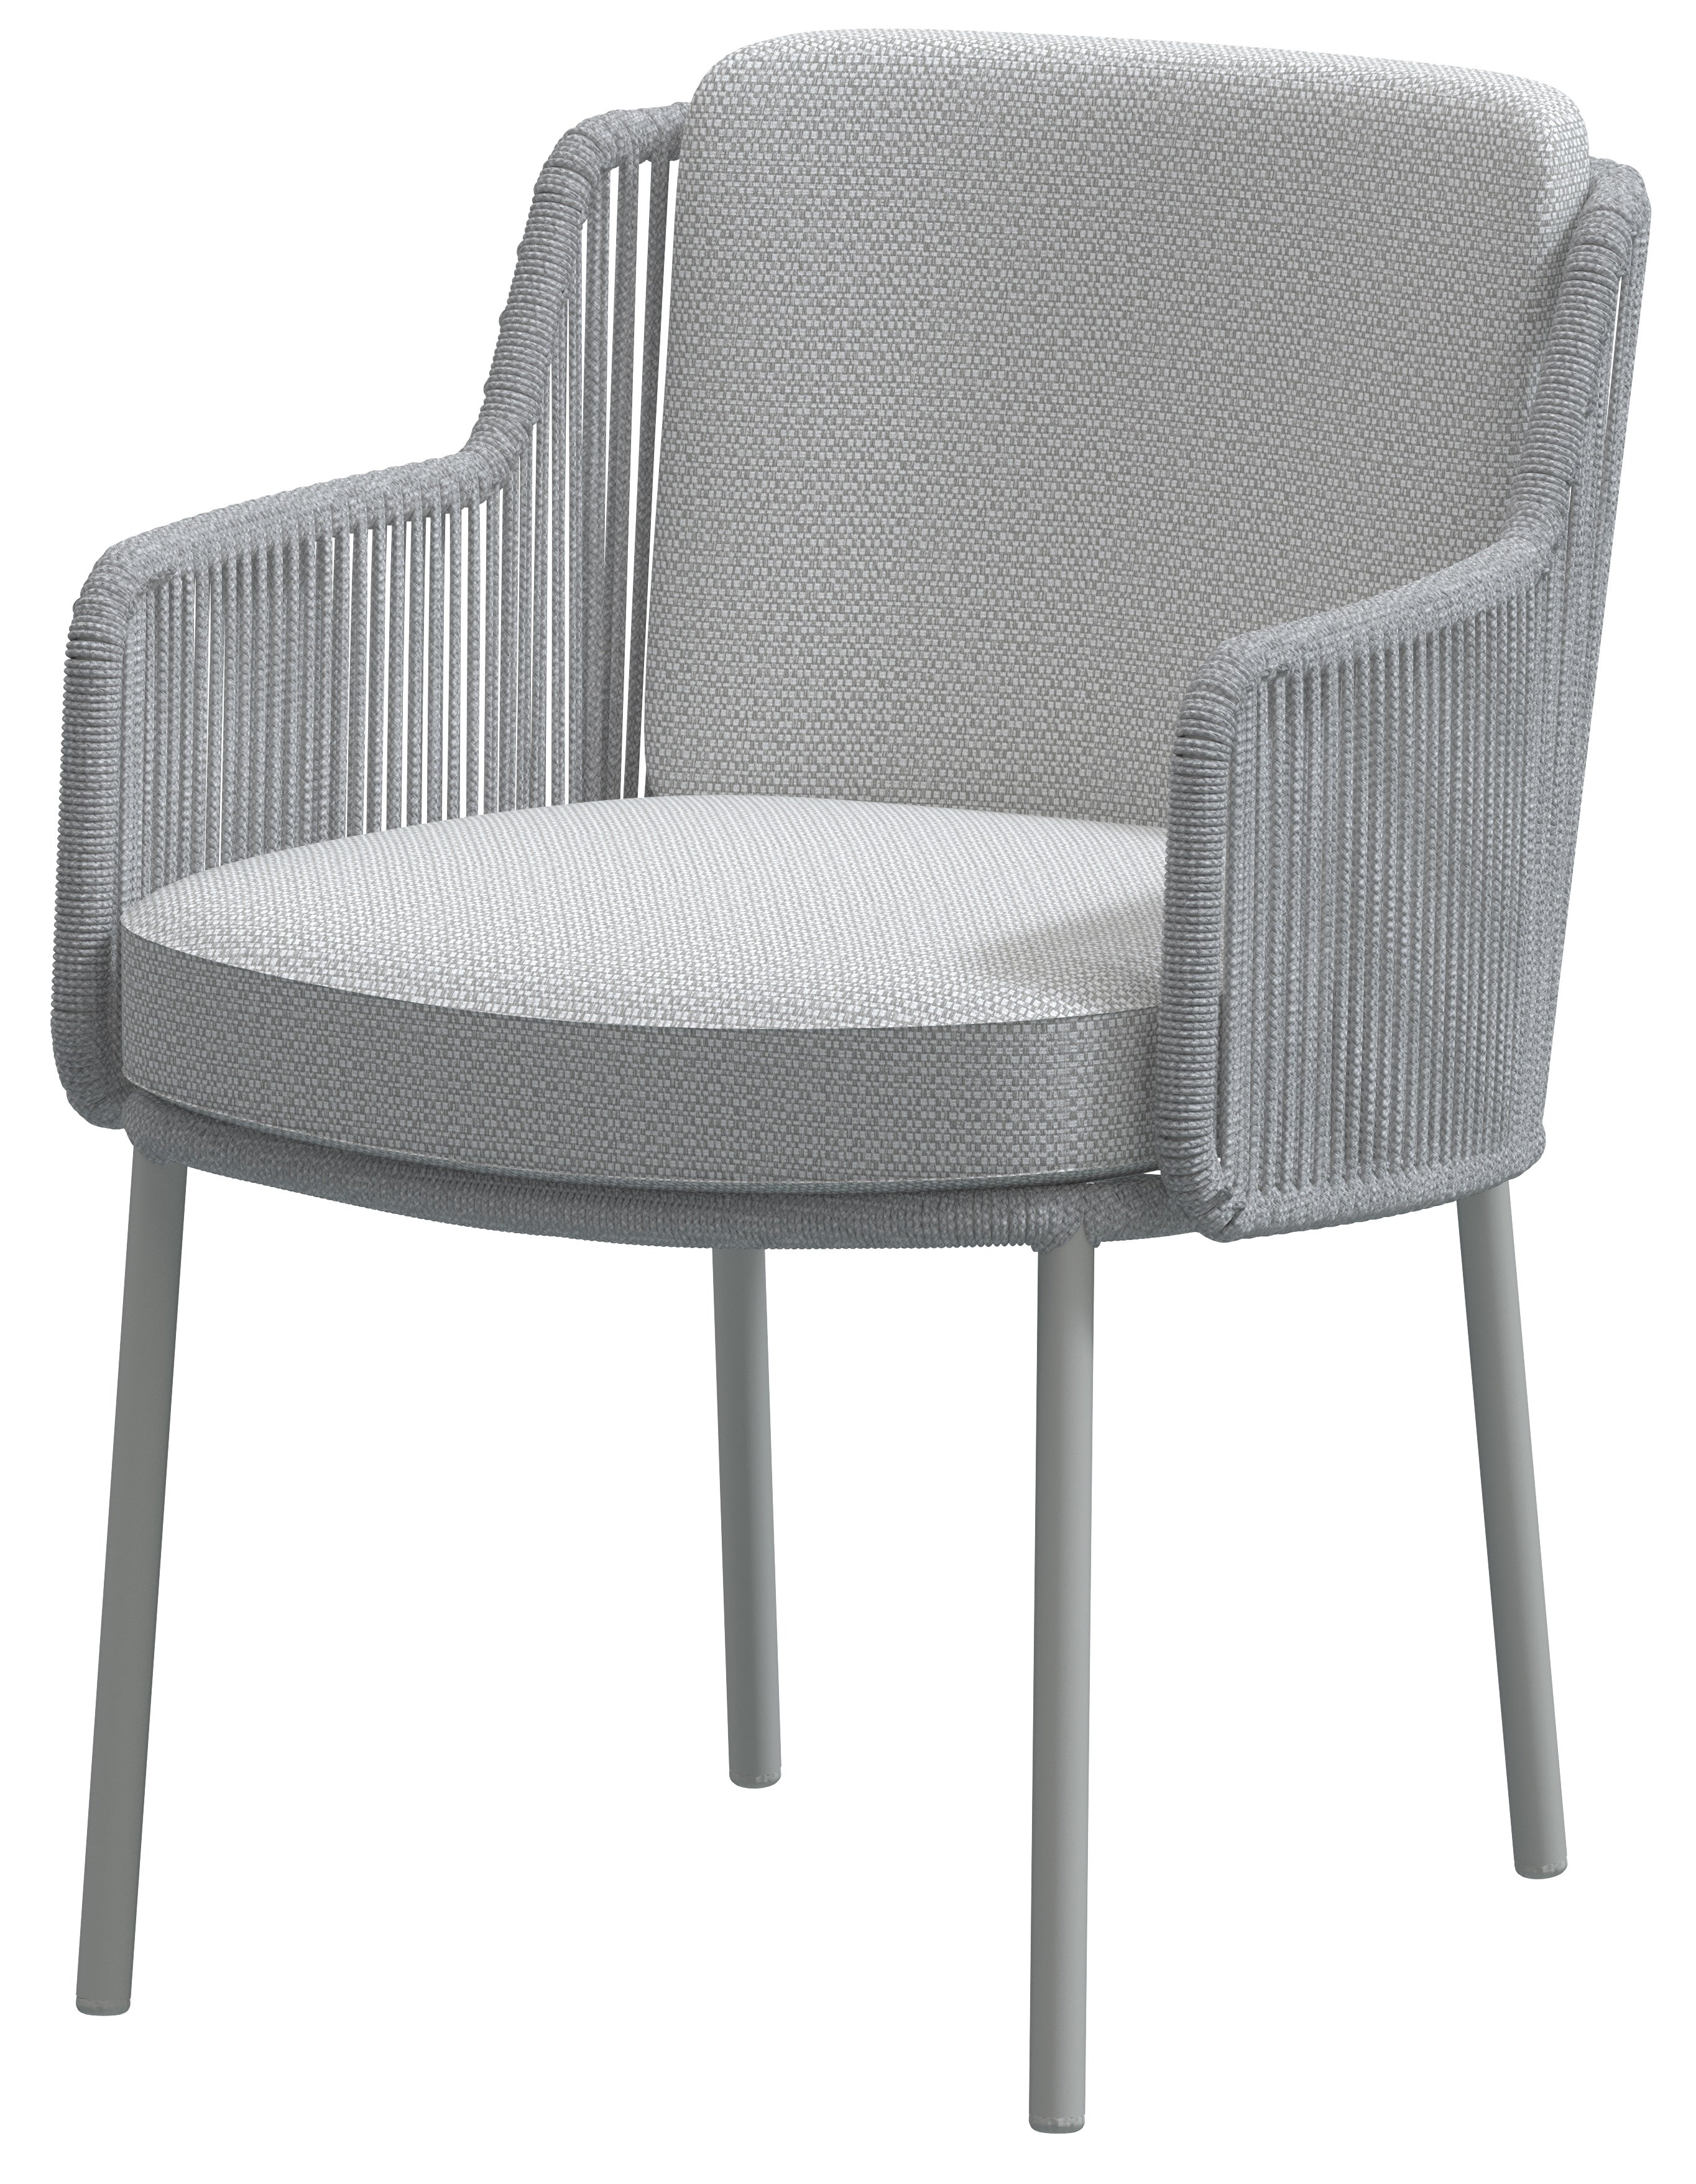 4 Seasons Outdoor Bernini Dining Chair Frozen With 2 Cushions (Packed In 2's)